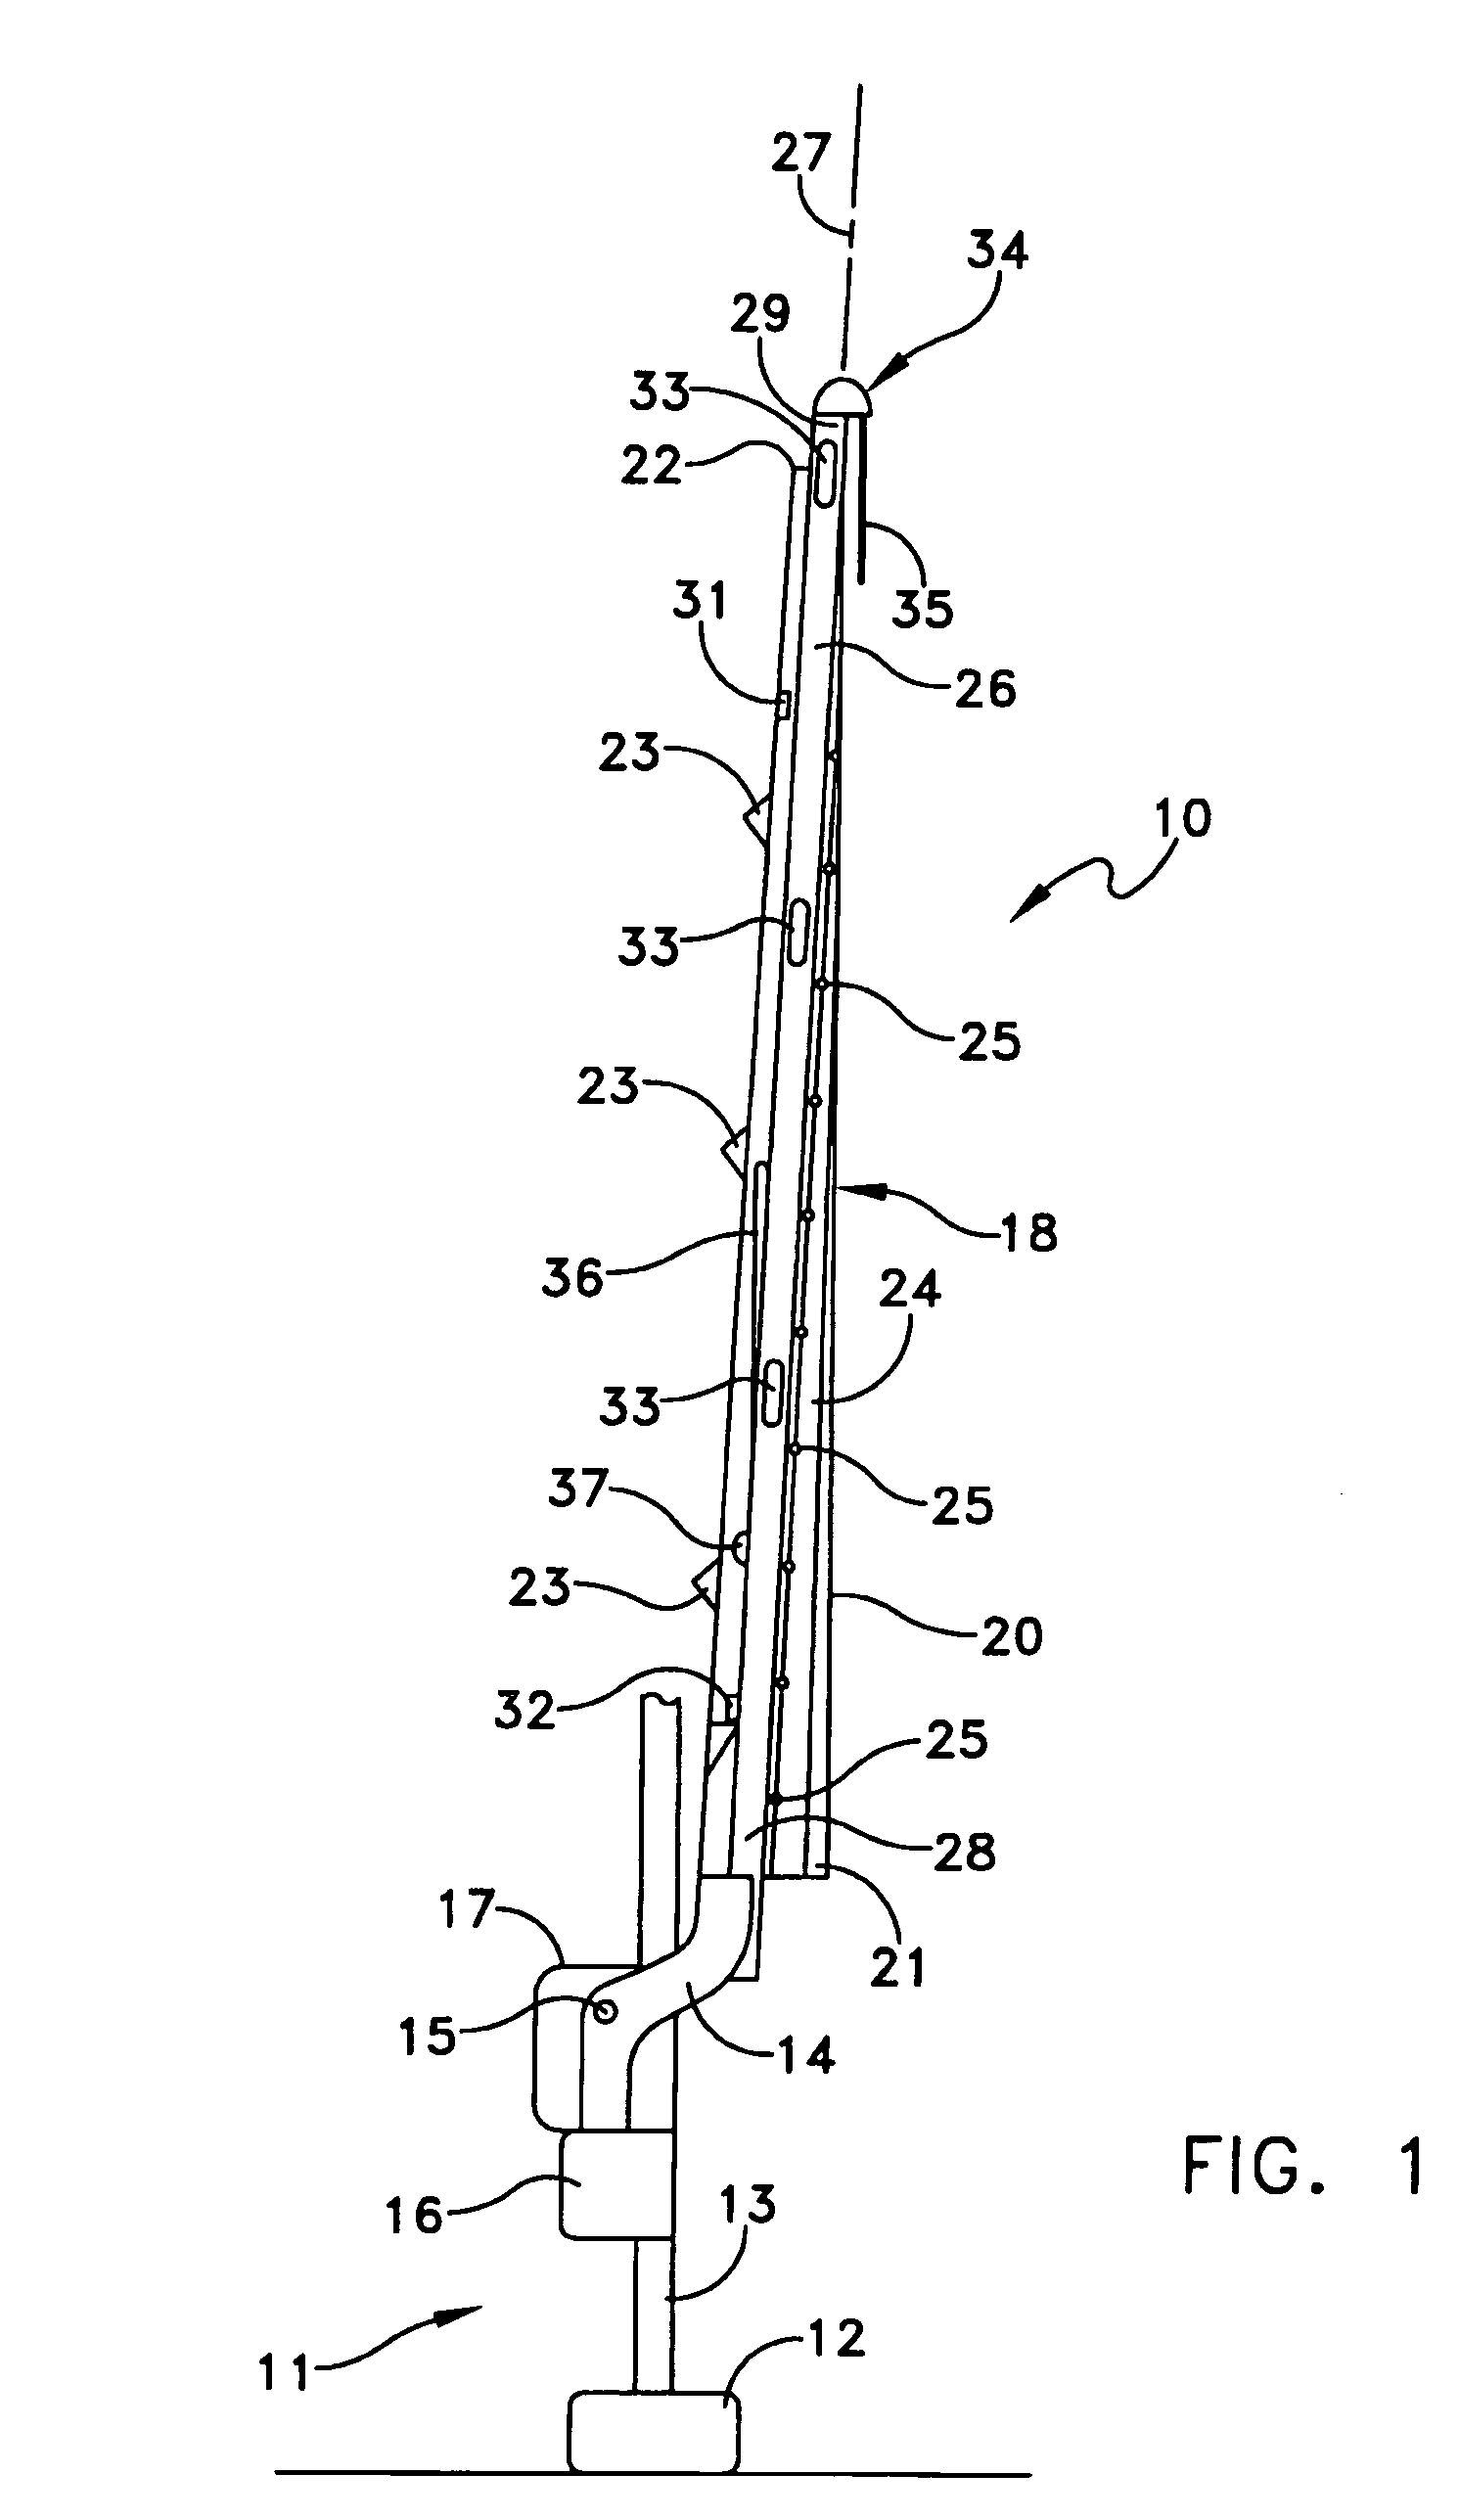 Apparatus for controlling traffic flow along a pathway